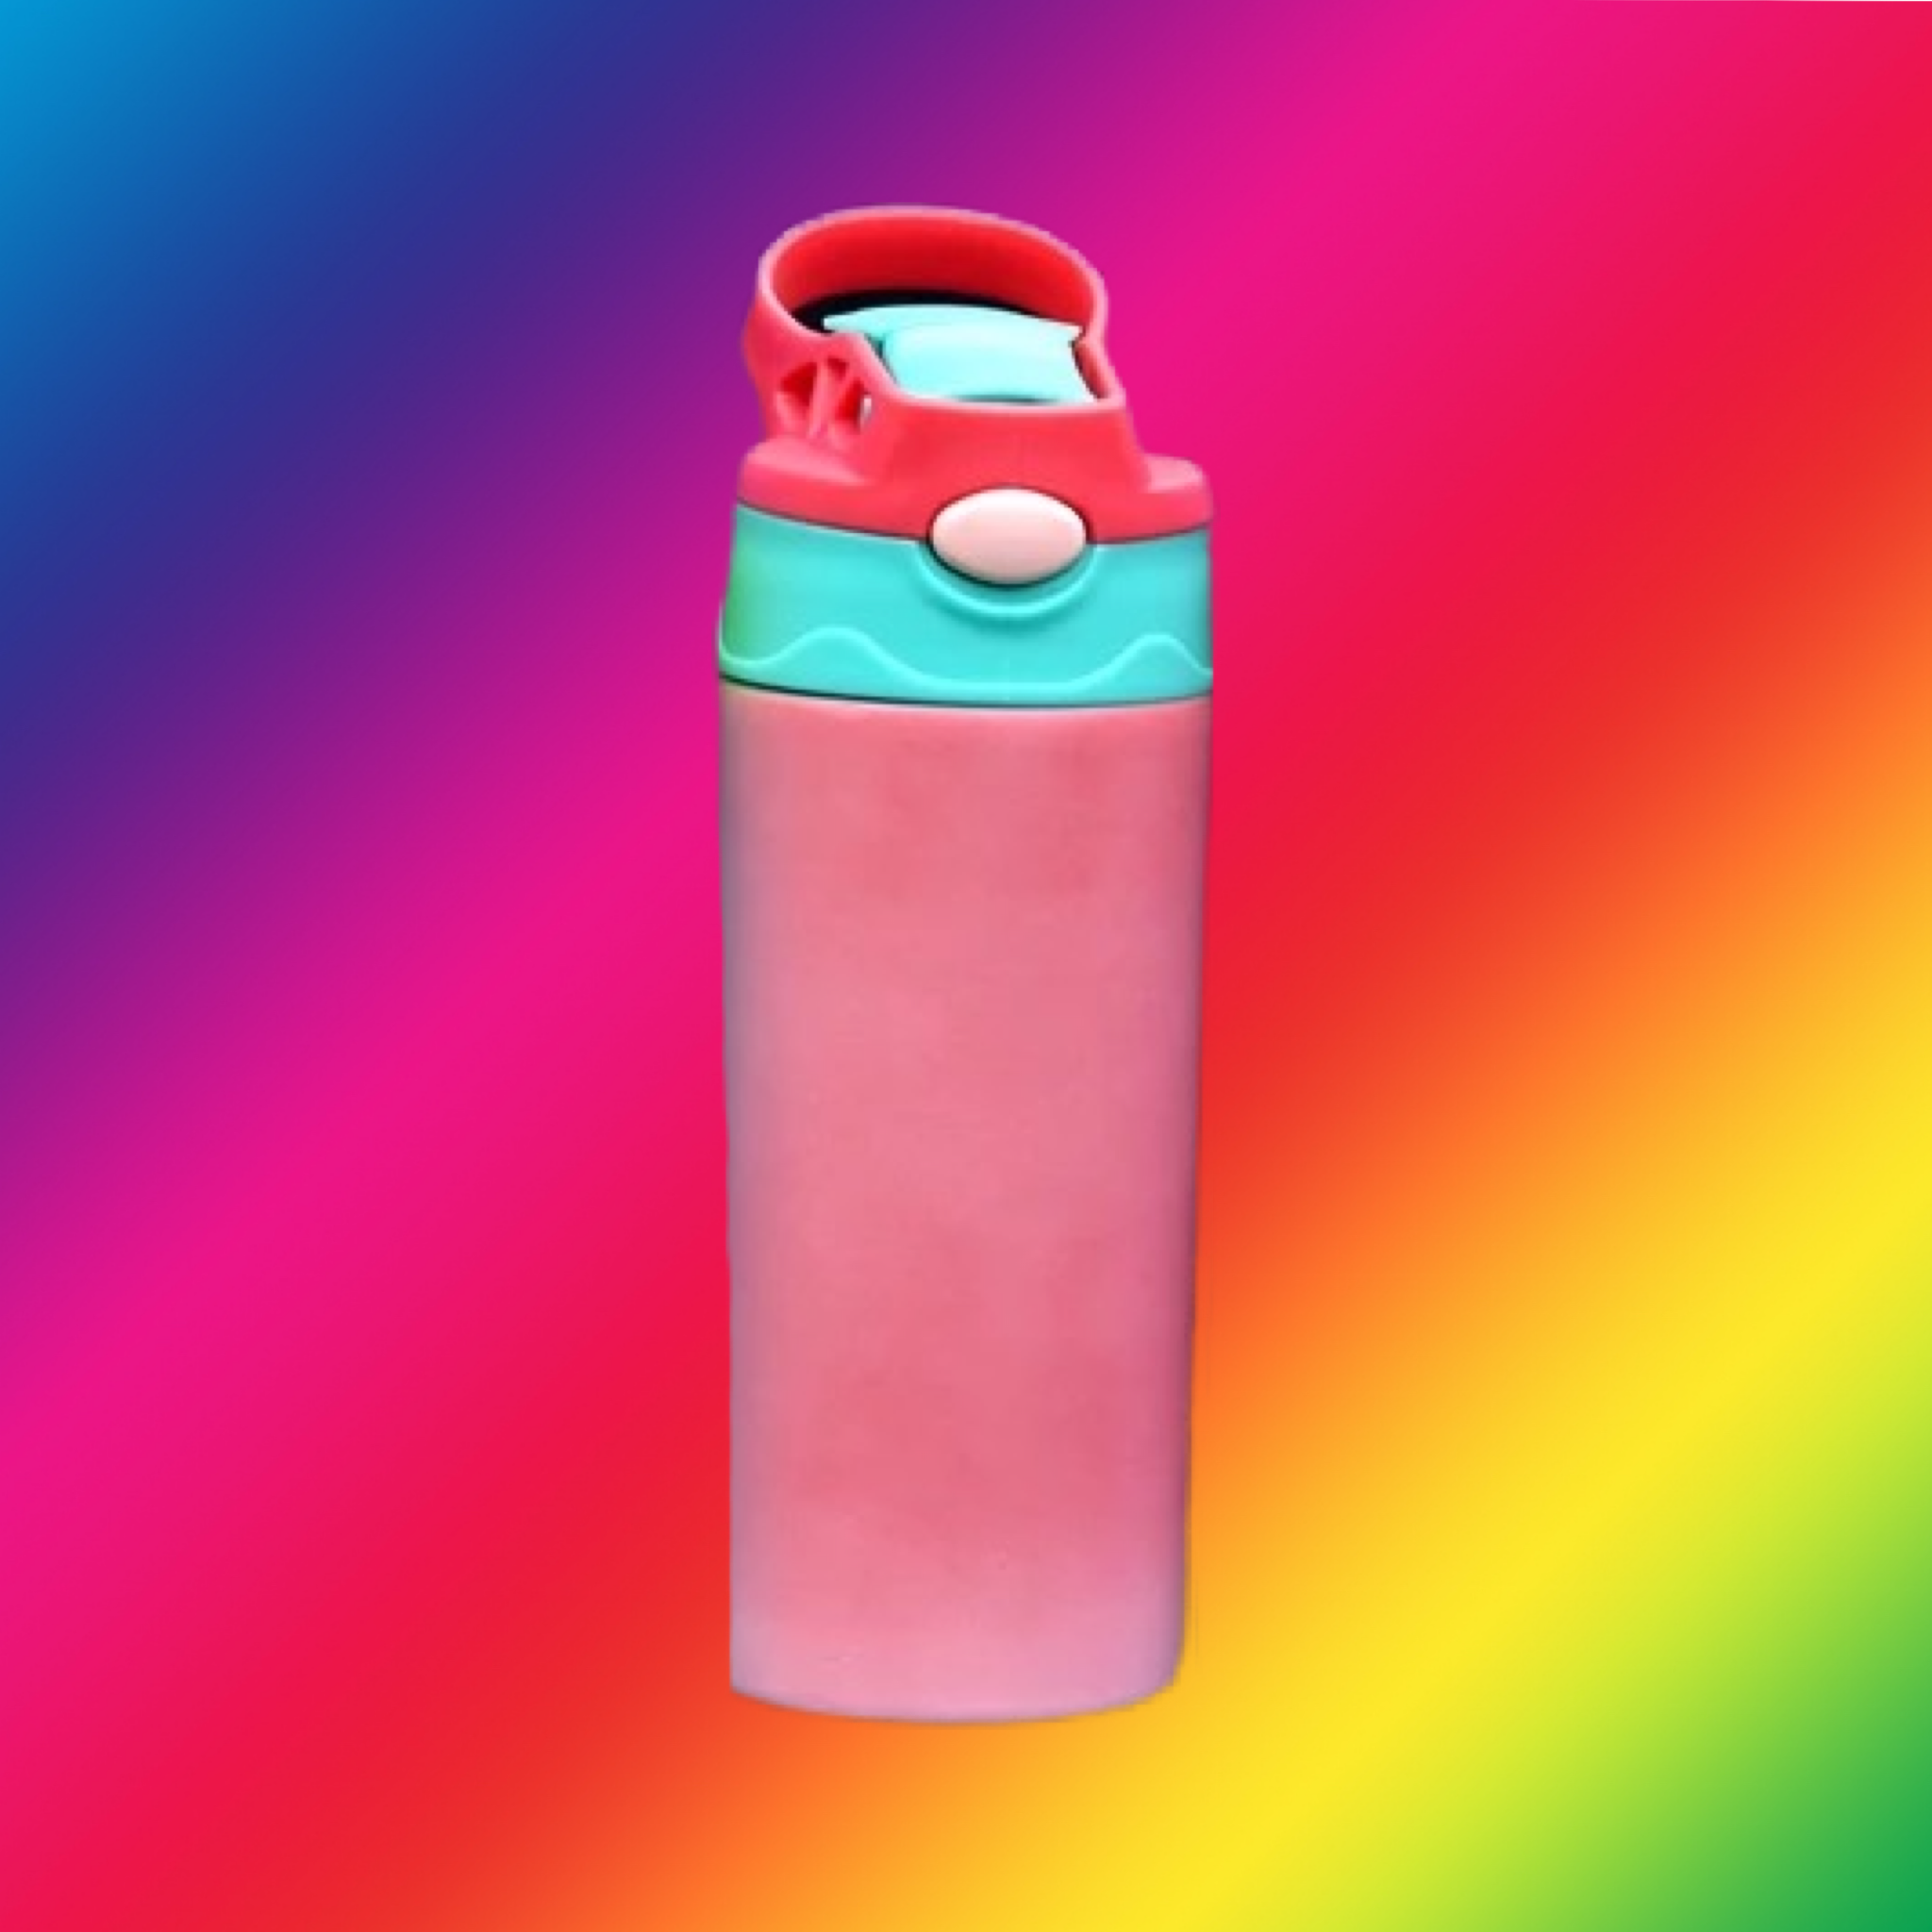 12OZ/ 350ML Sublimation UV Color Changing And Glow In The Dark Straight Kid Water Bottles Tumbler With 2 Function